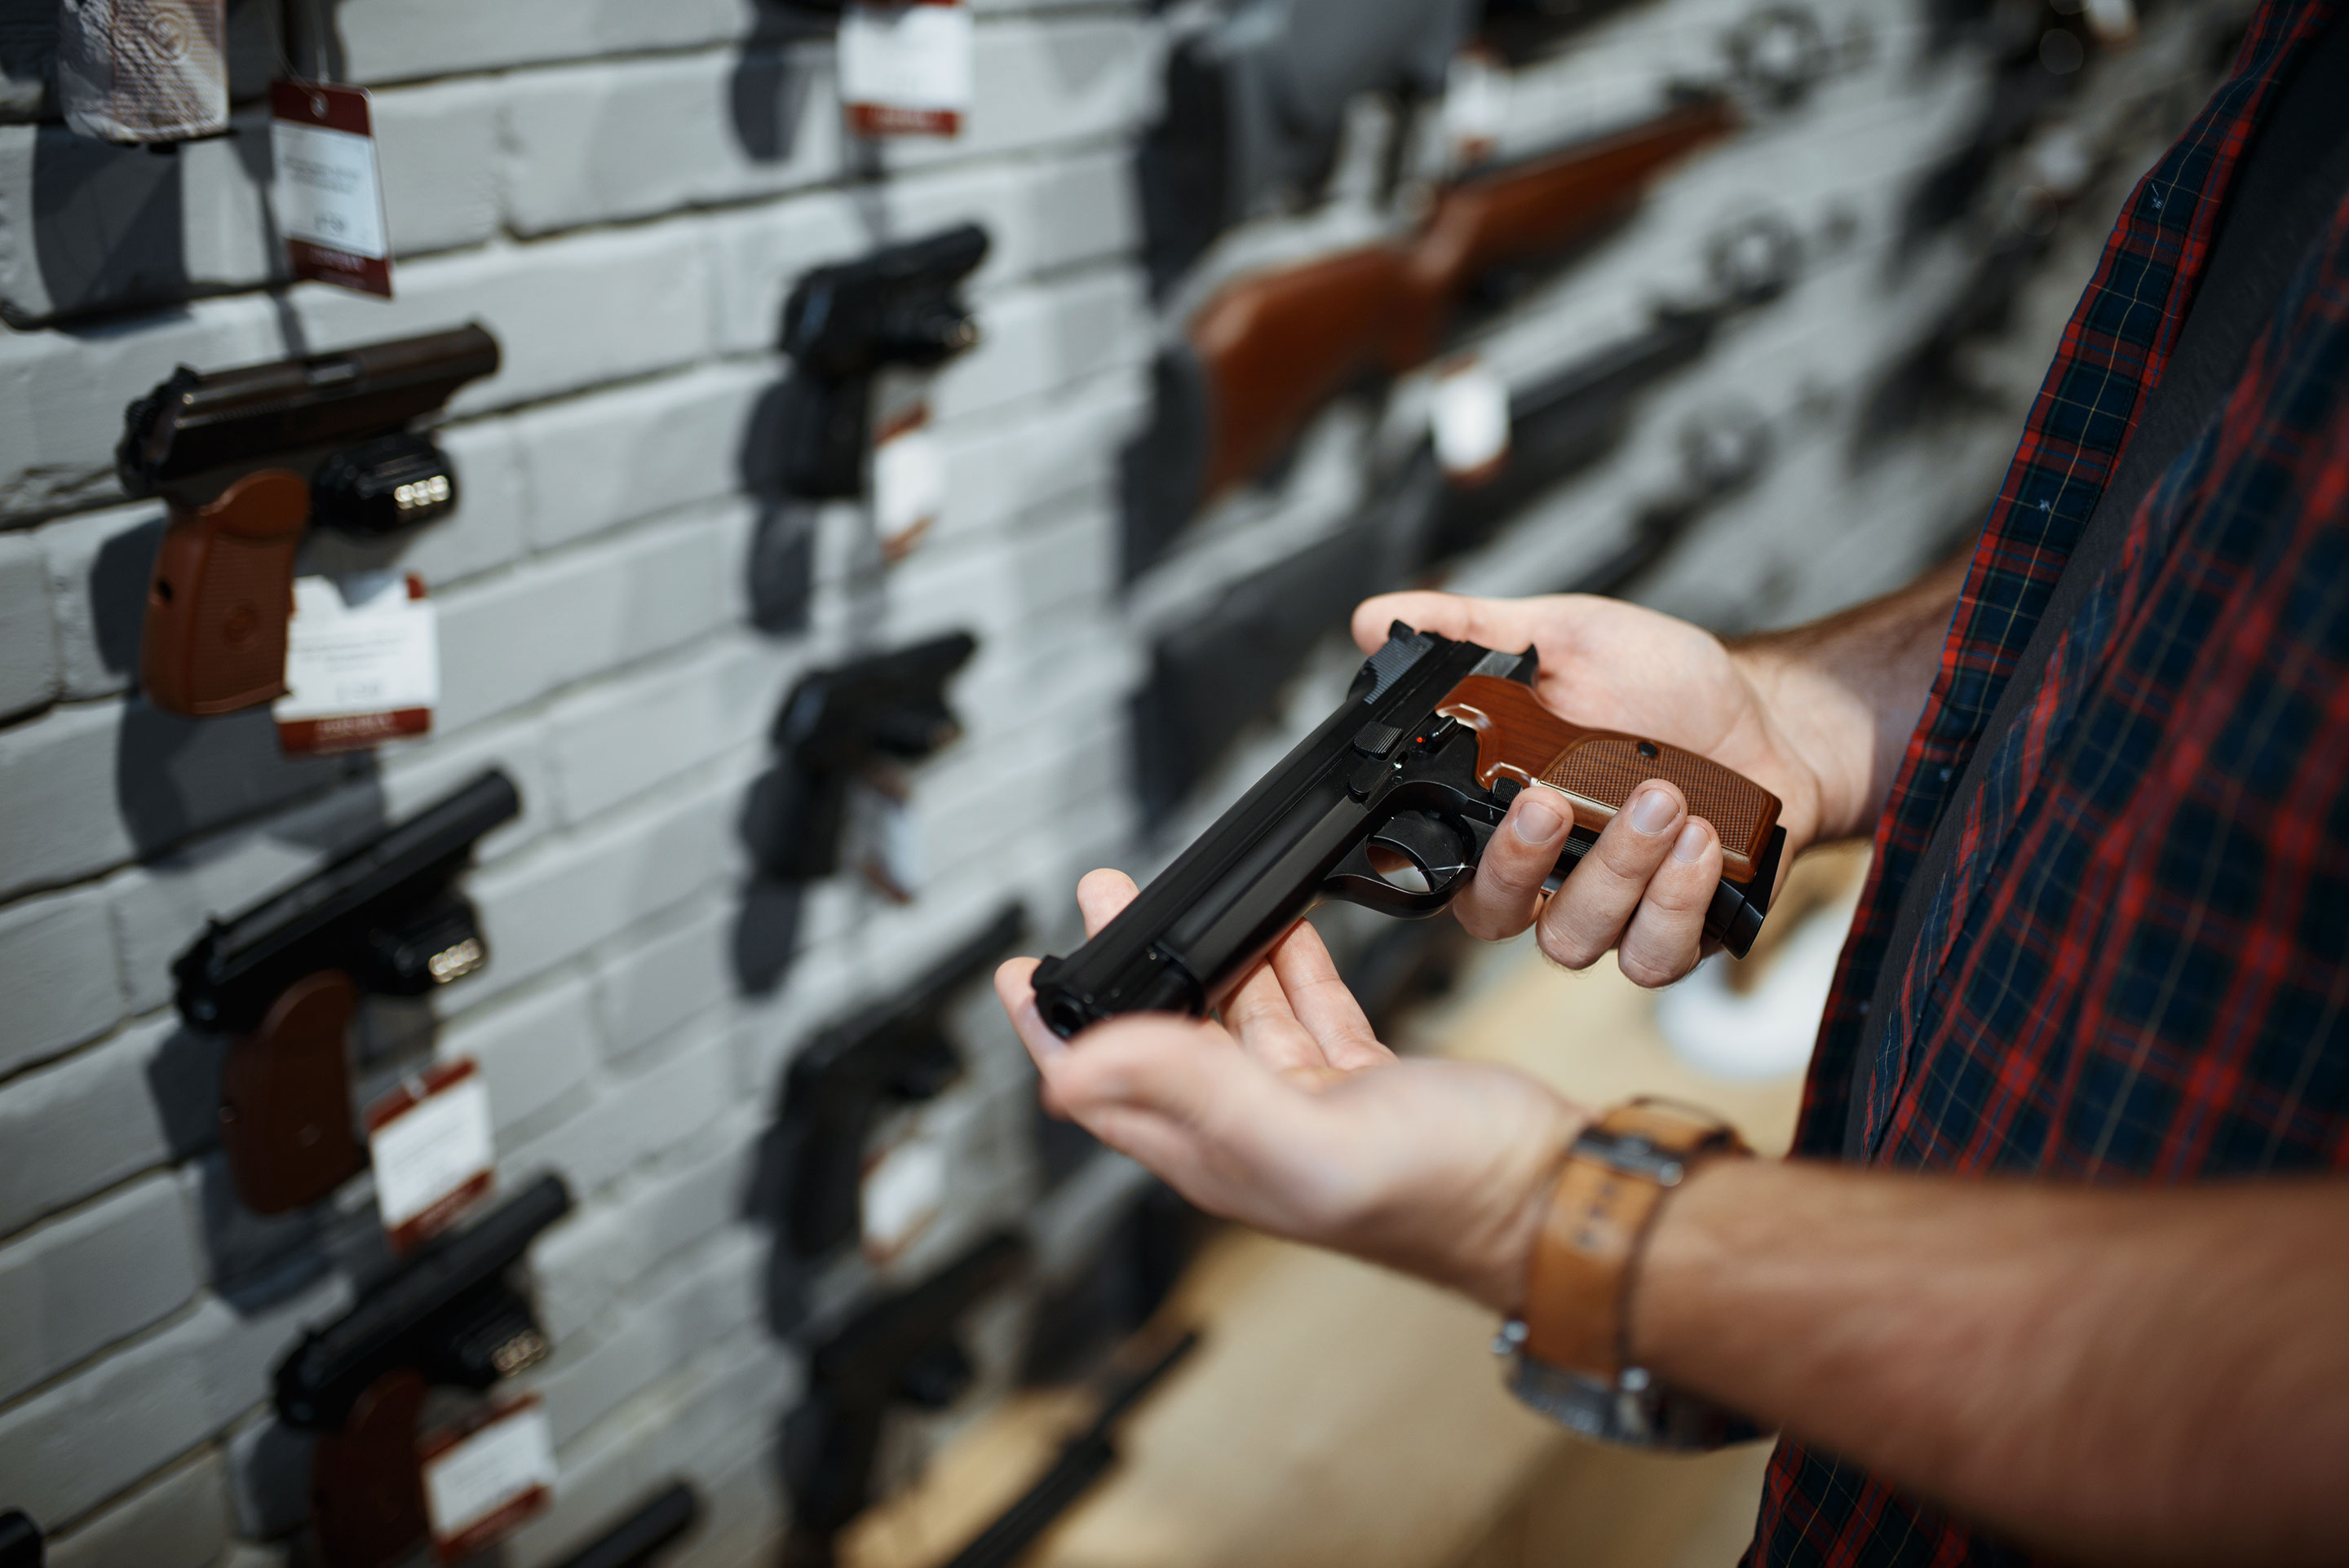 Who Bought Firearms During 2020 Purchasing Surge?